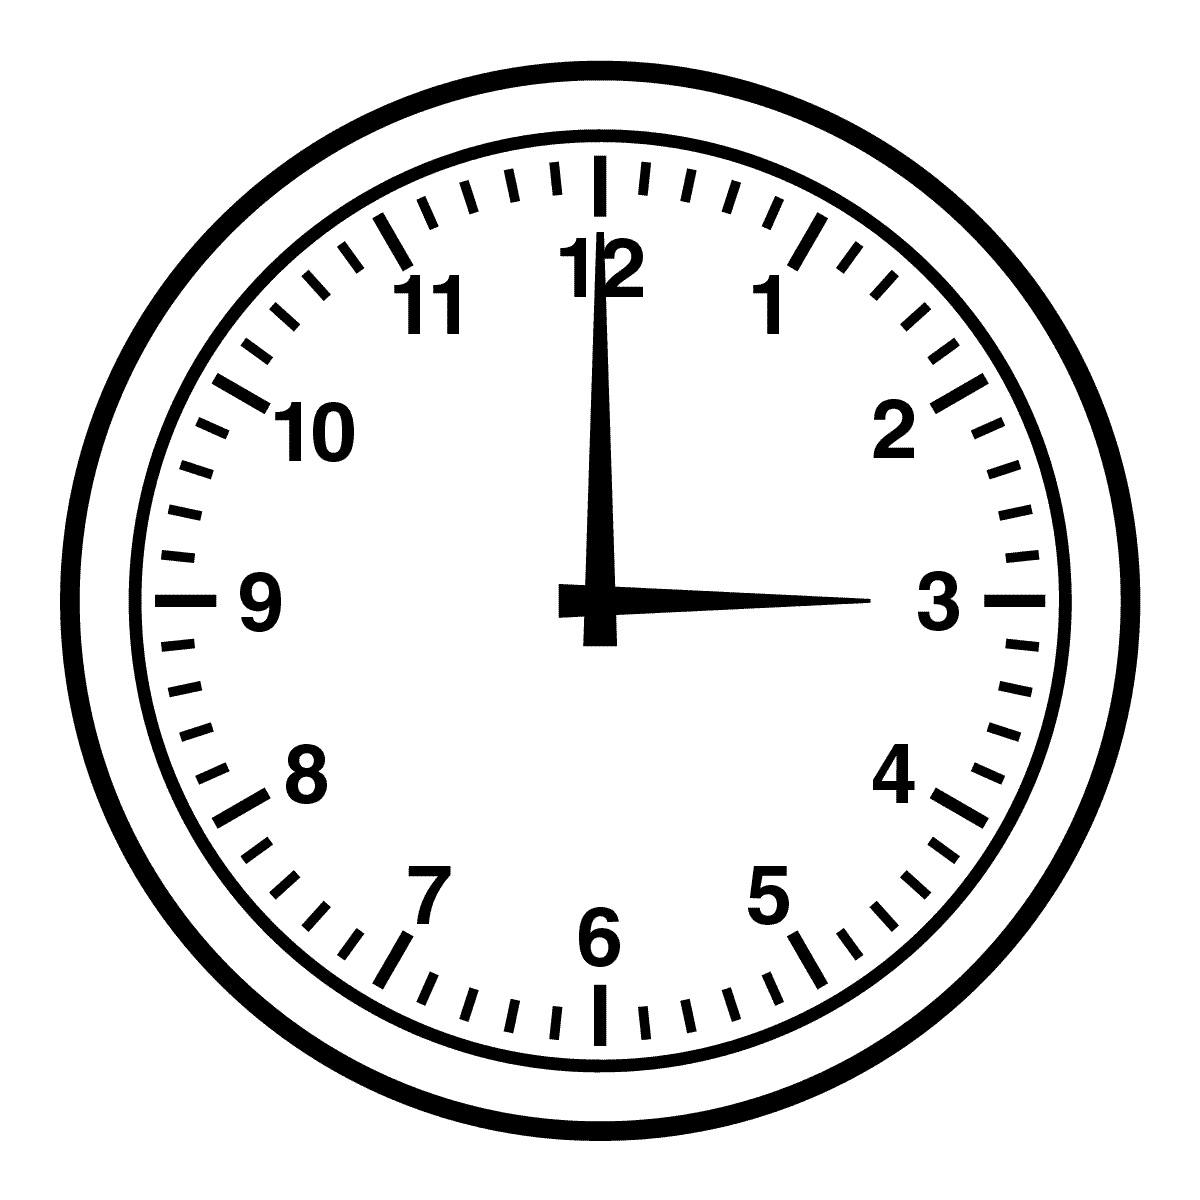 Free Clocks Clipart Images